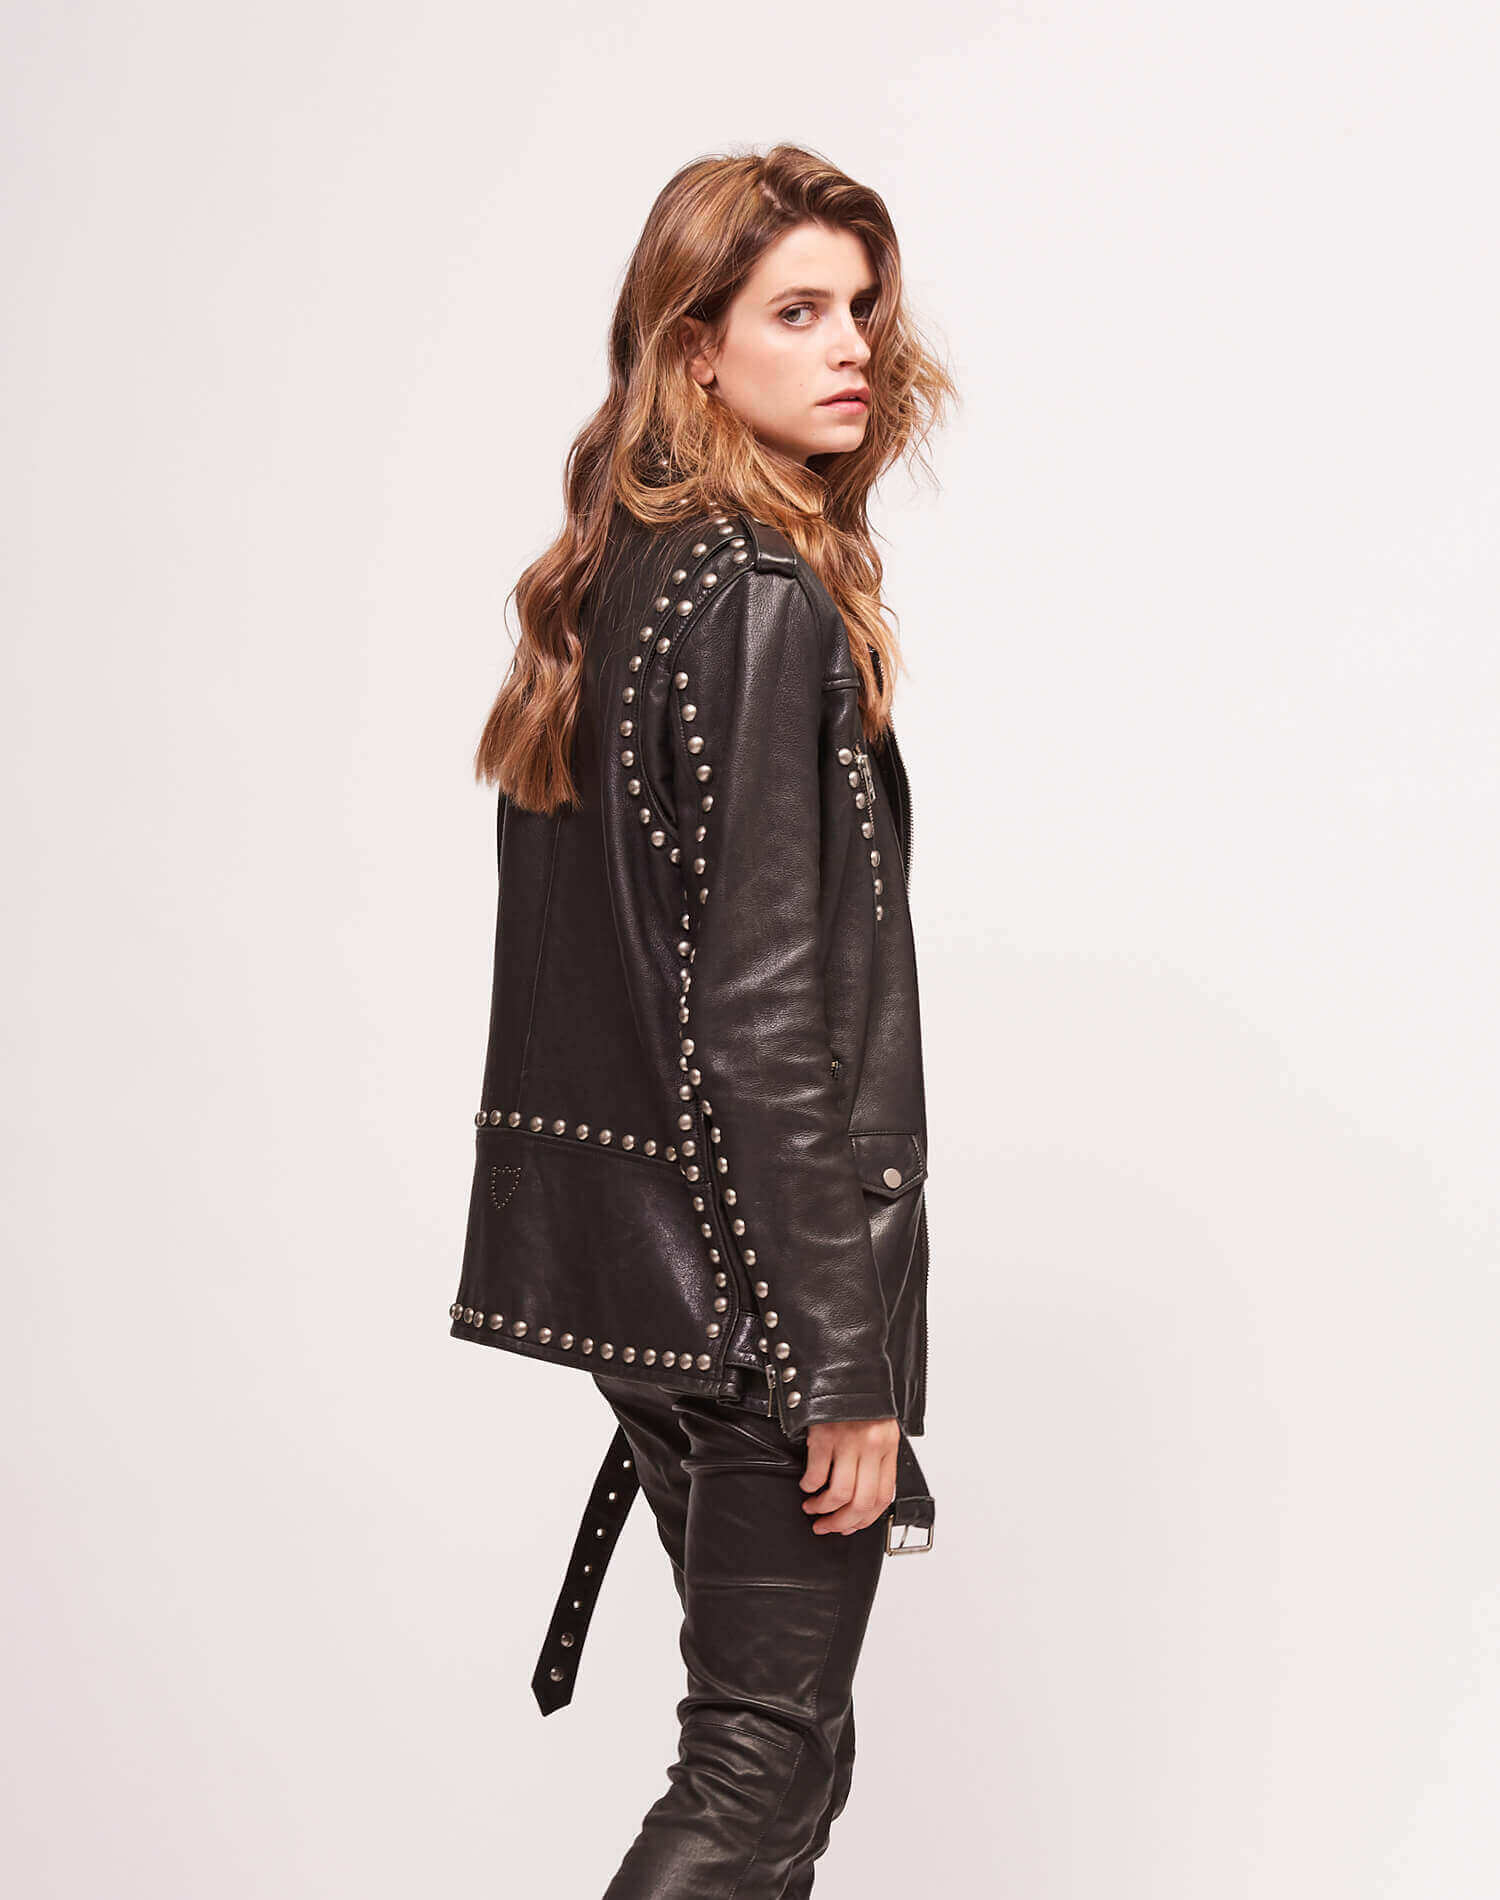 BONNIE JACKET Black leather studded jacket. Central zip closure. Side and frontal pockets with zip closure. 100% leather. Made in Italy. HTC LOS ANGELES